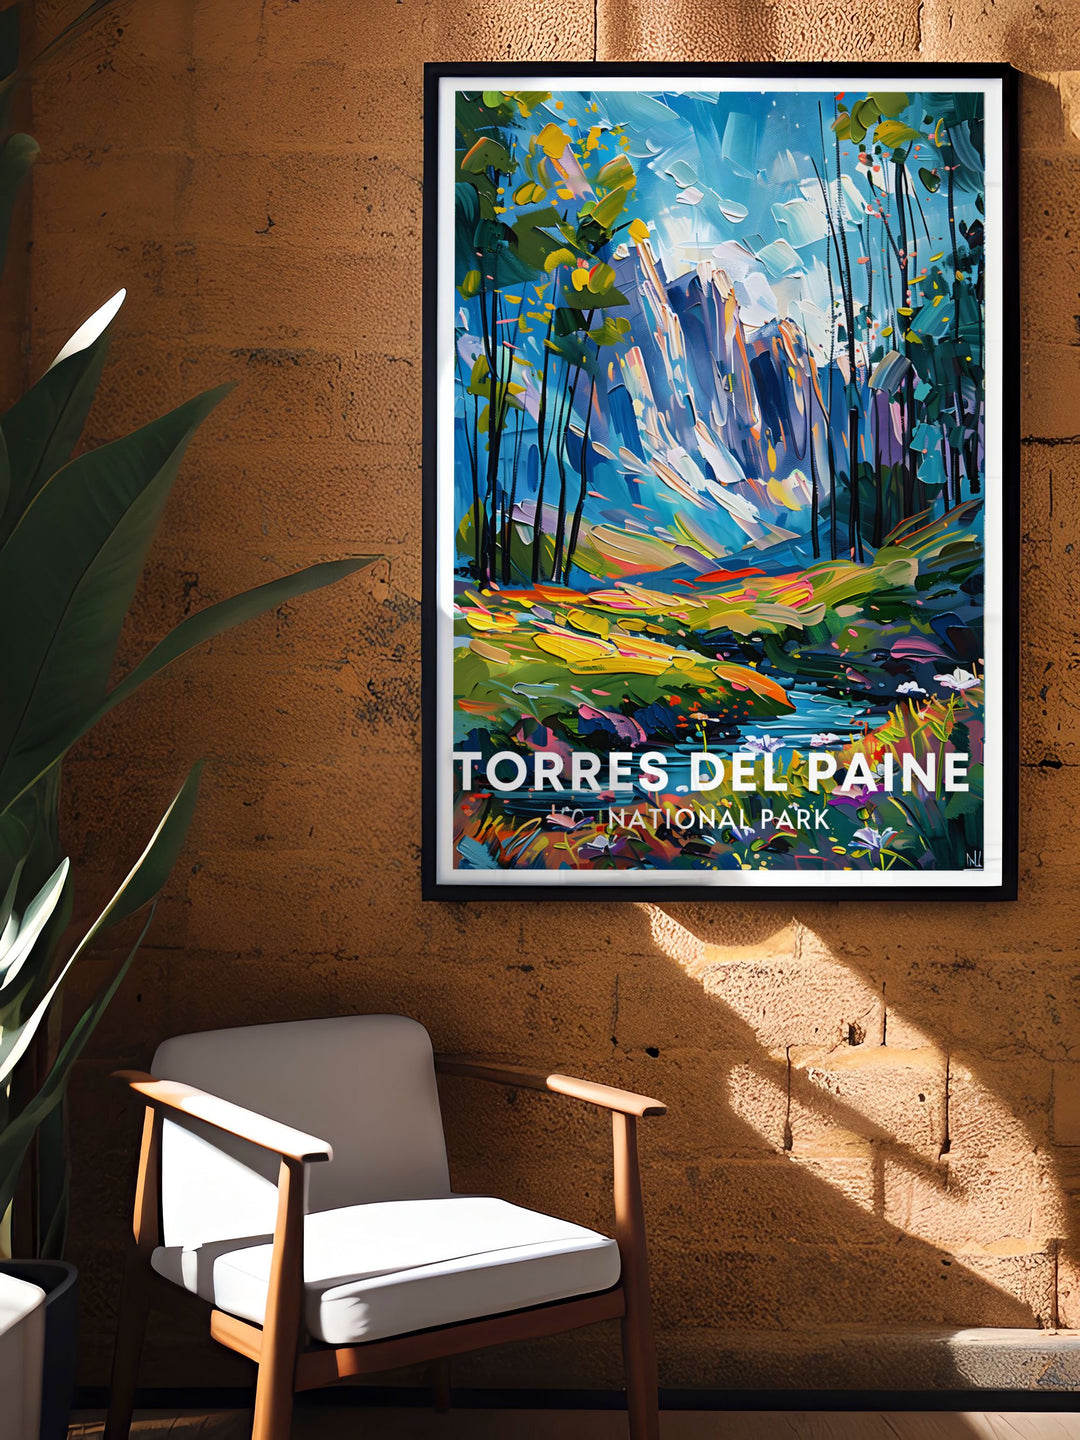 Guanaco artwork with the stunning backdrop of Glaciar Gray in Torres Del Paine National Park Patagonia Chile. This retro travel poster is perfect for wildlife lovers and those who want to capture the essence of South American landscapes.